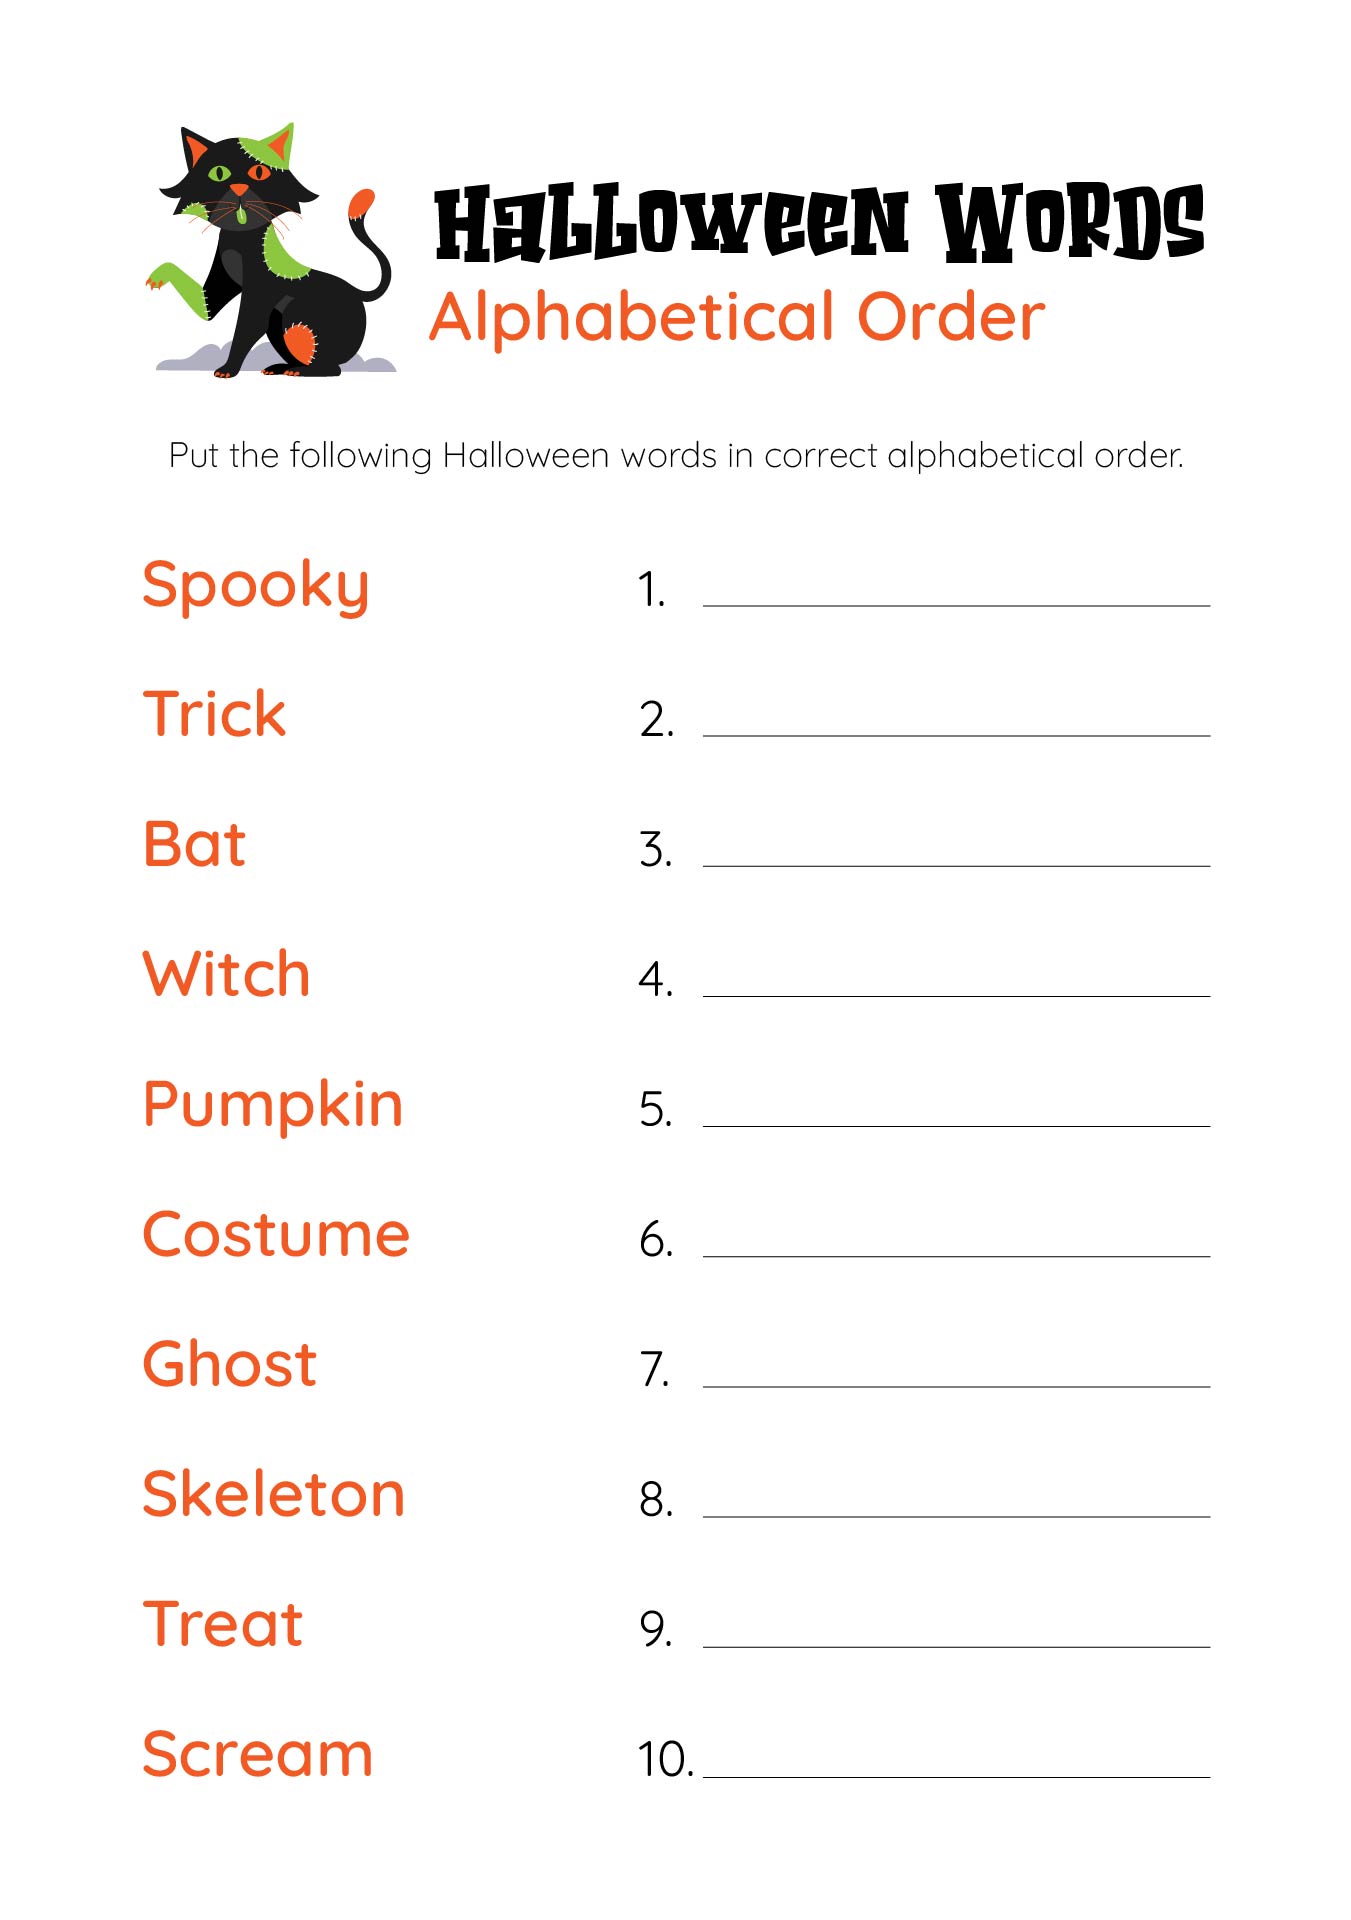 Alphabetical Order Halloween Words Printable Holiday Activity For 2nd-4th Grade